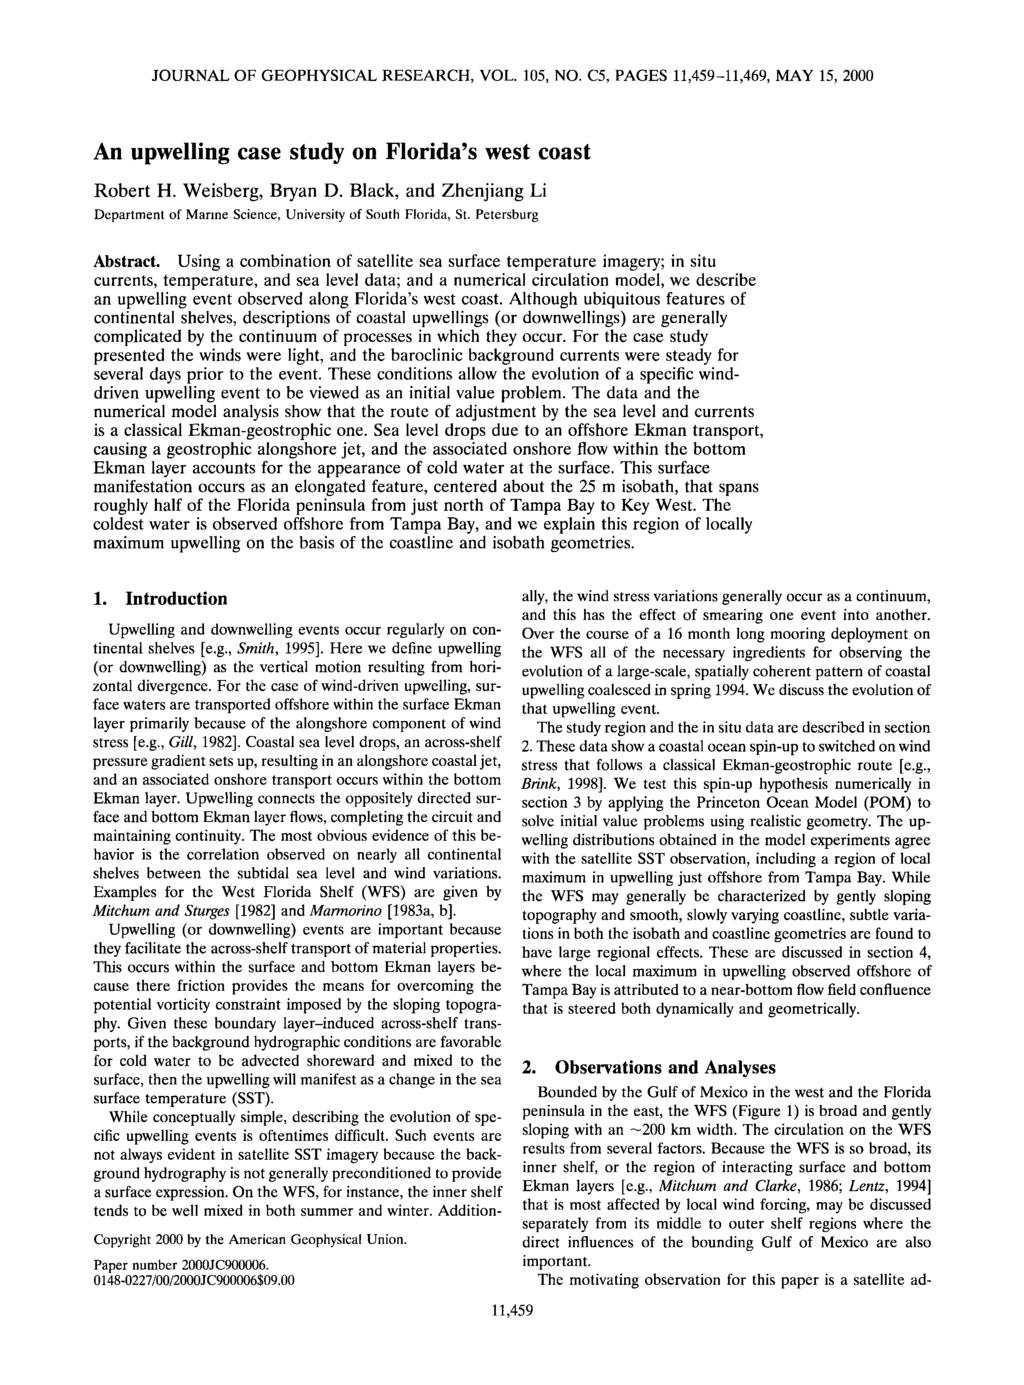 JOURNAL OF GEOPHYSICAL RESEARCH VOL. 105 NO. C5 PAGES 11459-11469 MAY 15 2000 An upwelling case study on Florida's west coast Robert H. Weisberg Bryan D.